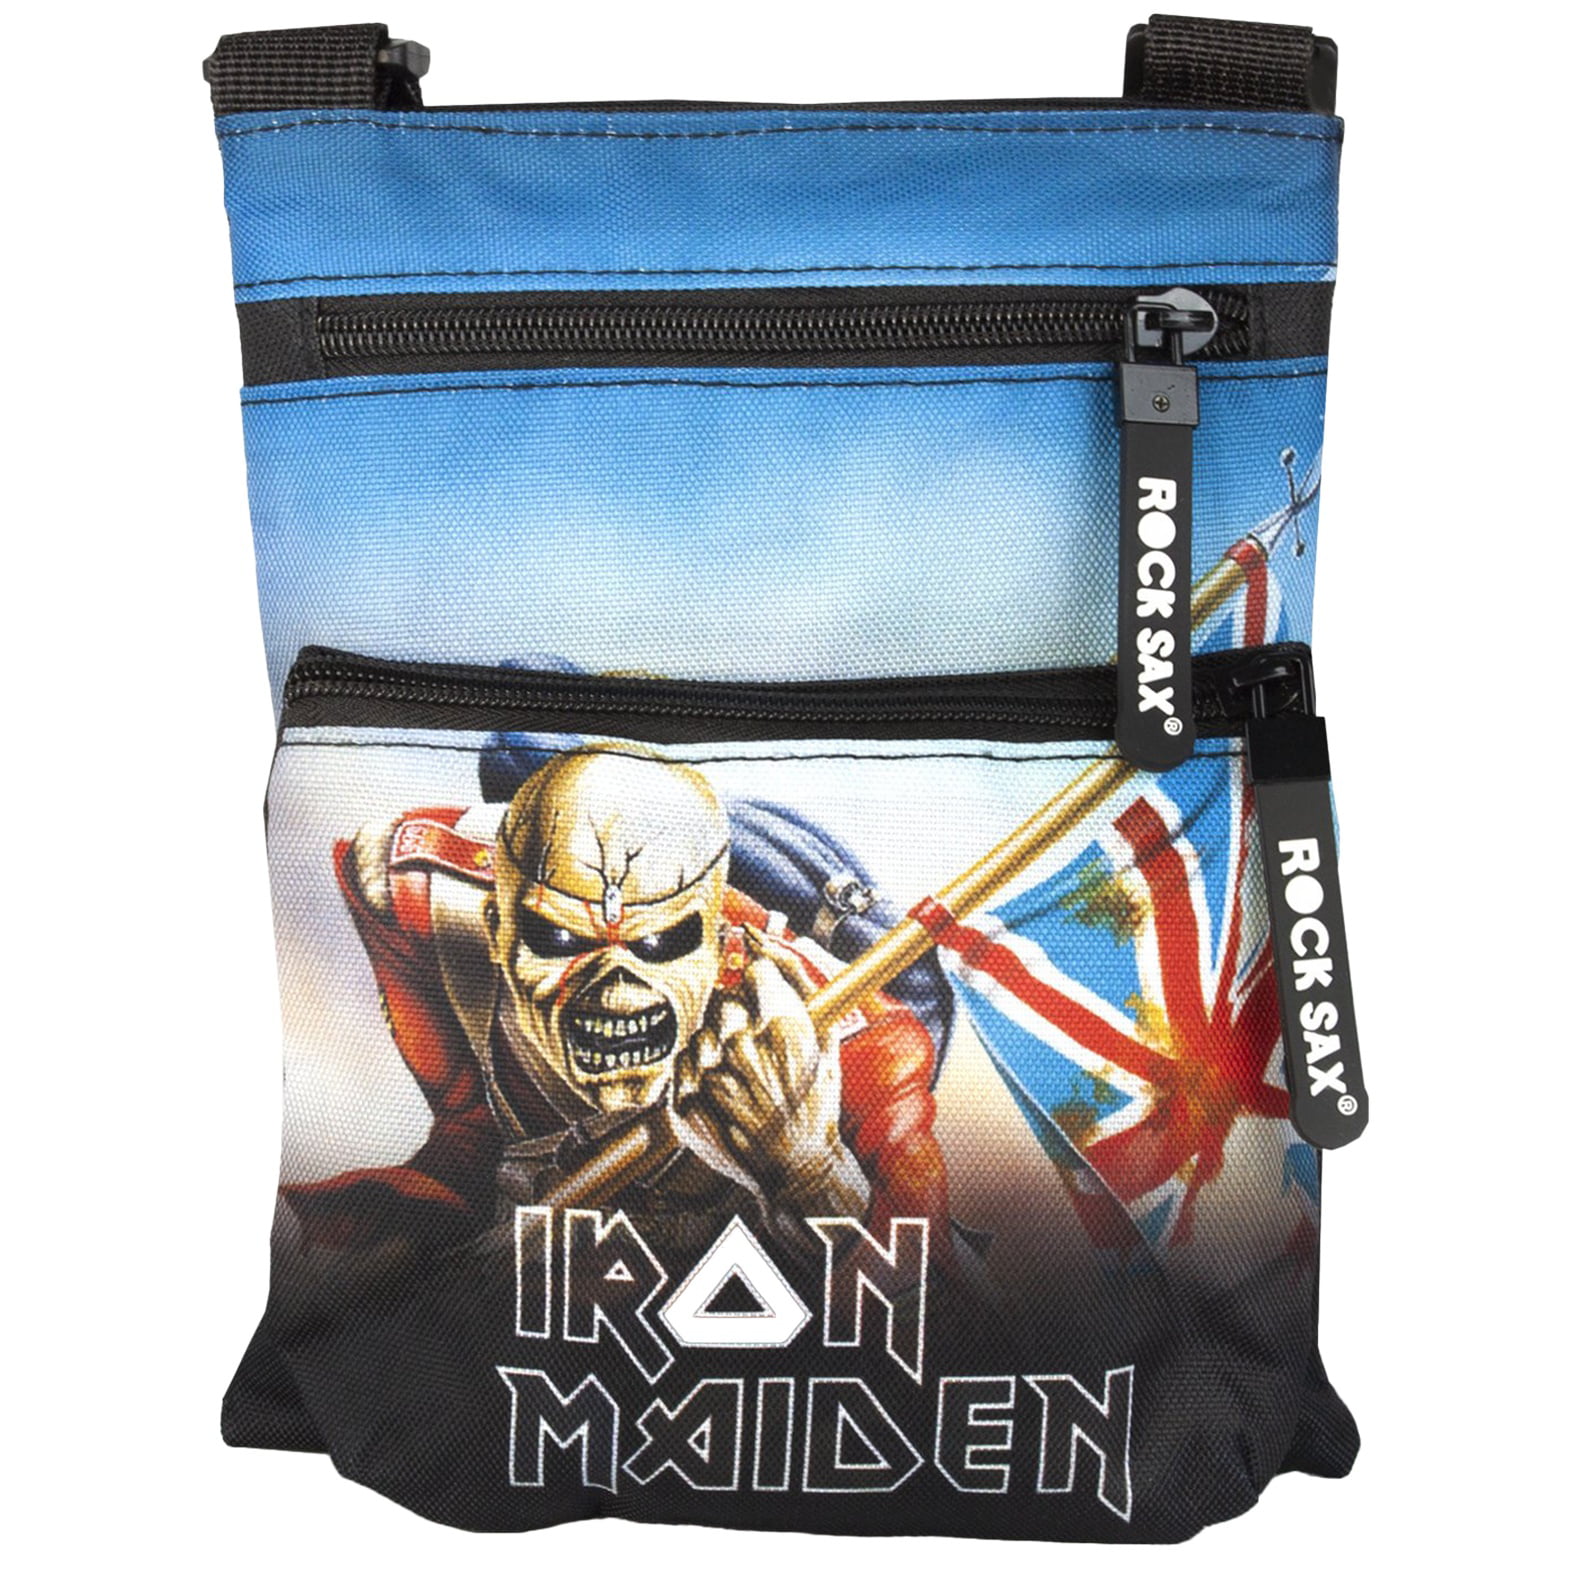 Iron Maiden The Trooper Tote Black Shopping Reusable Bag Satchel Gift Official